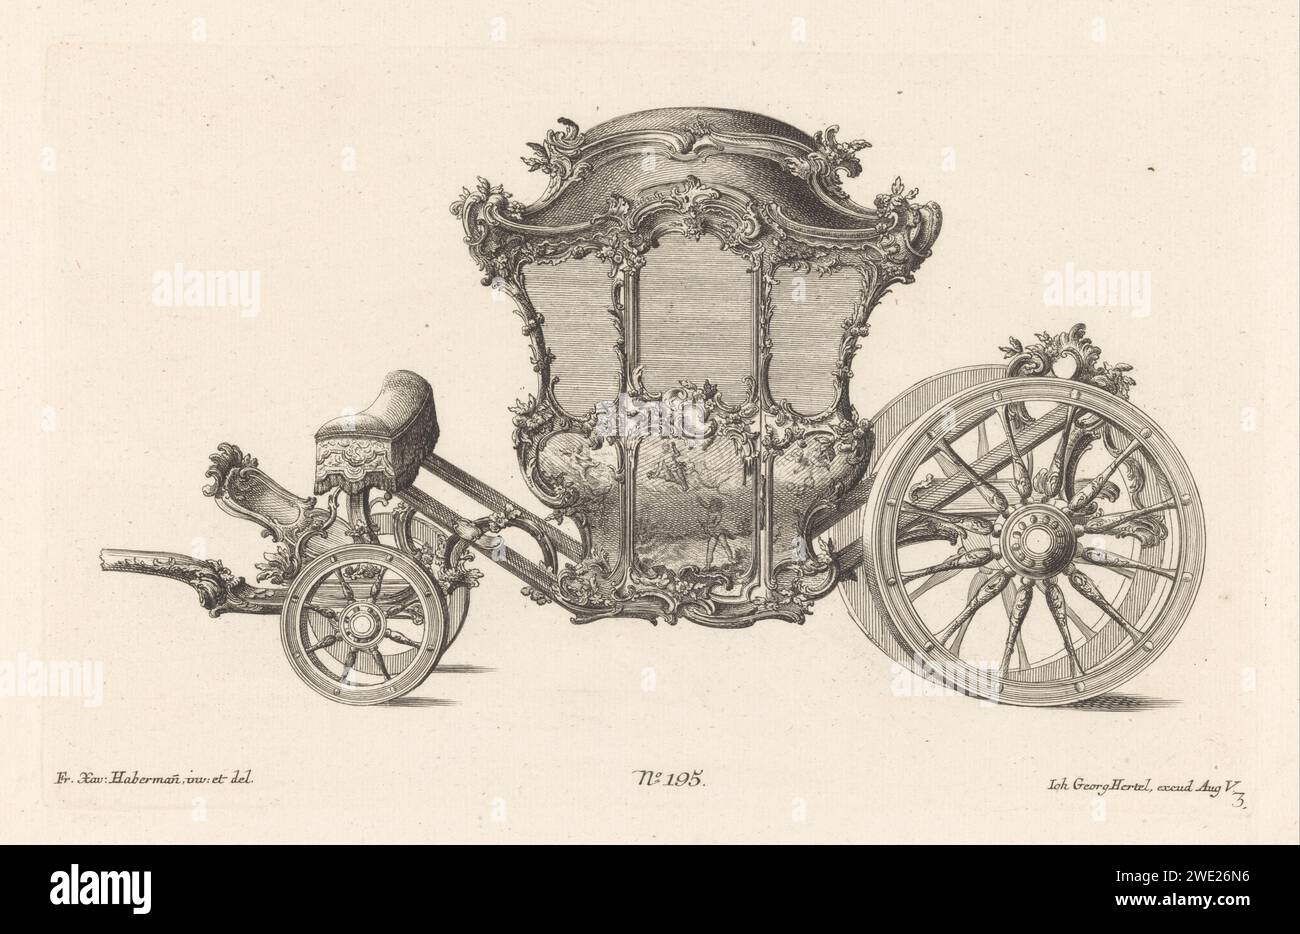 Dense Koets, Anonymous, after Franz Xaver Habermann, 1731 - 1775 print Dense carriage with rocaille ornaments, flower motifs and paintings with putti. Publishing number 195. Augsburg paper etching / engraving four-wheeled, animal-drawn vehicle, e.g.: cab, carriage, coach Stock Photo